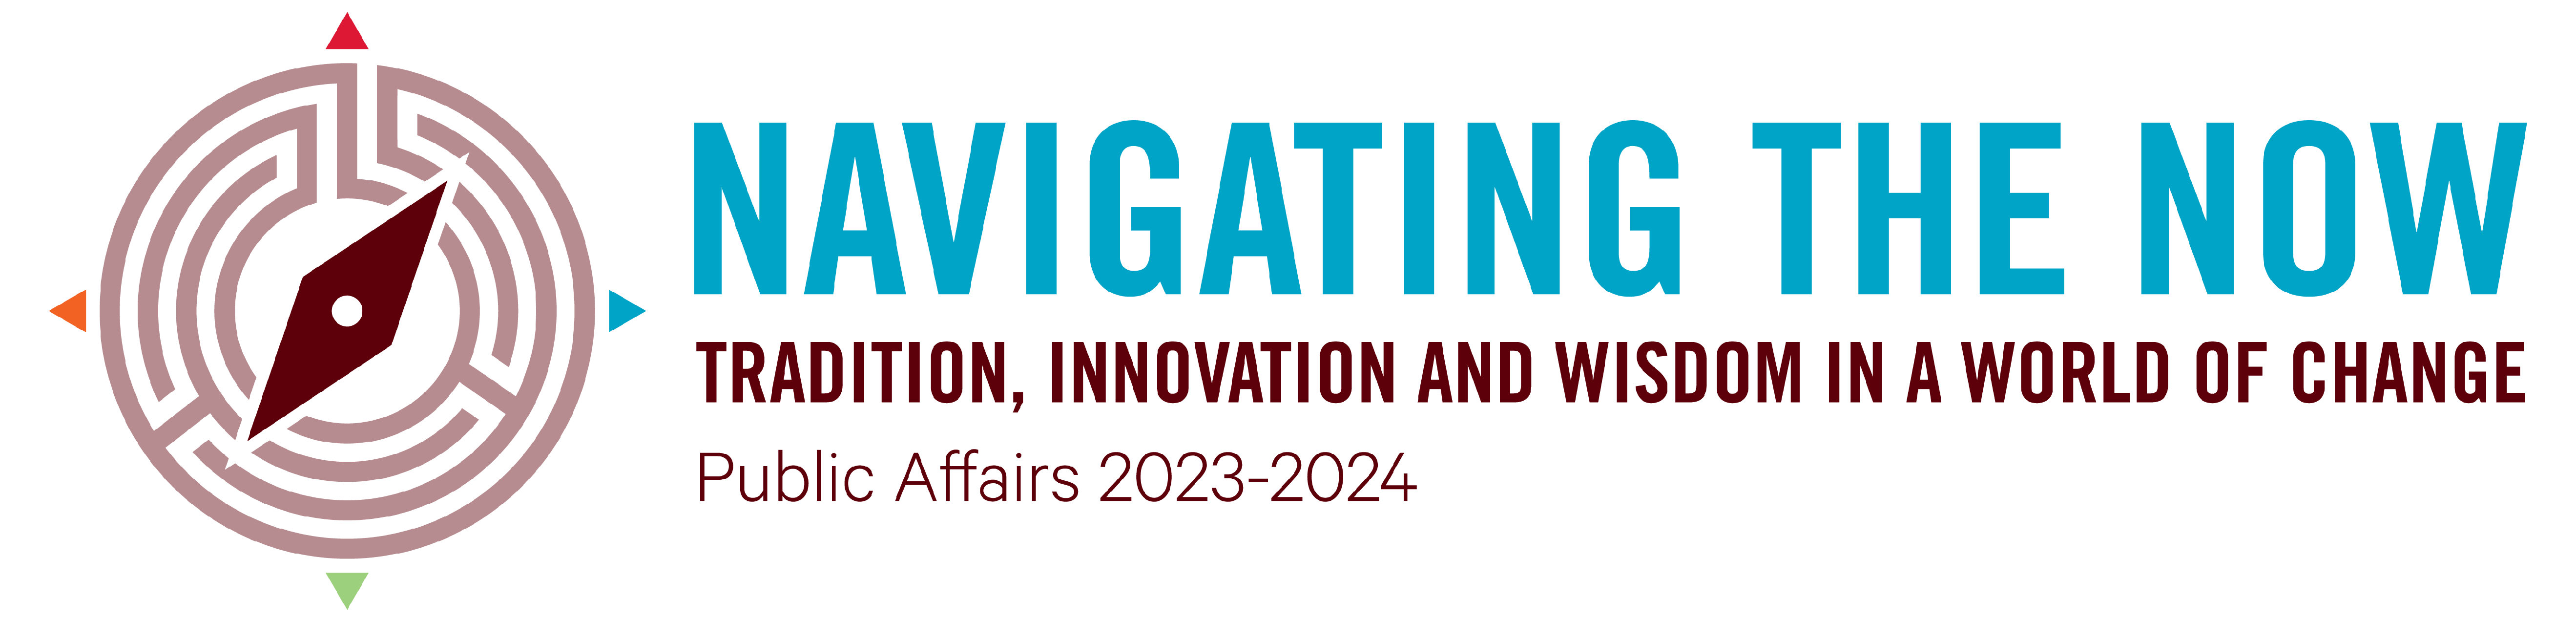 Navigating the Now - Public Affairs 2023-2024